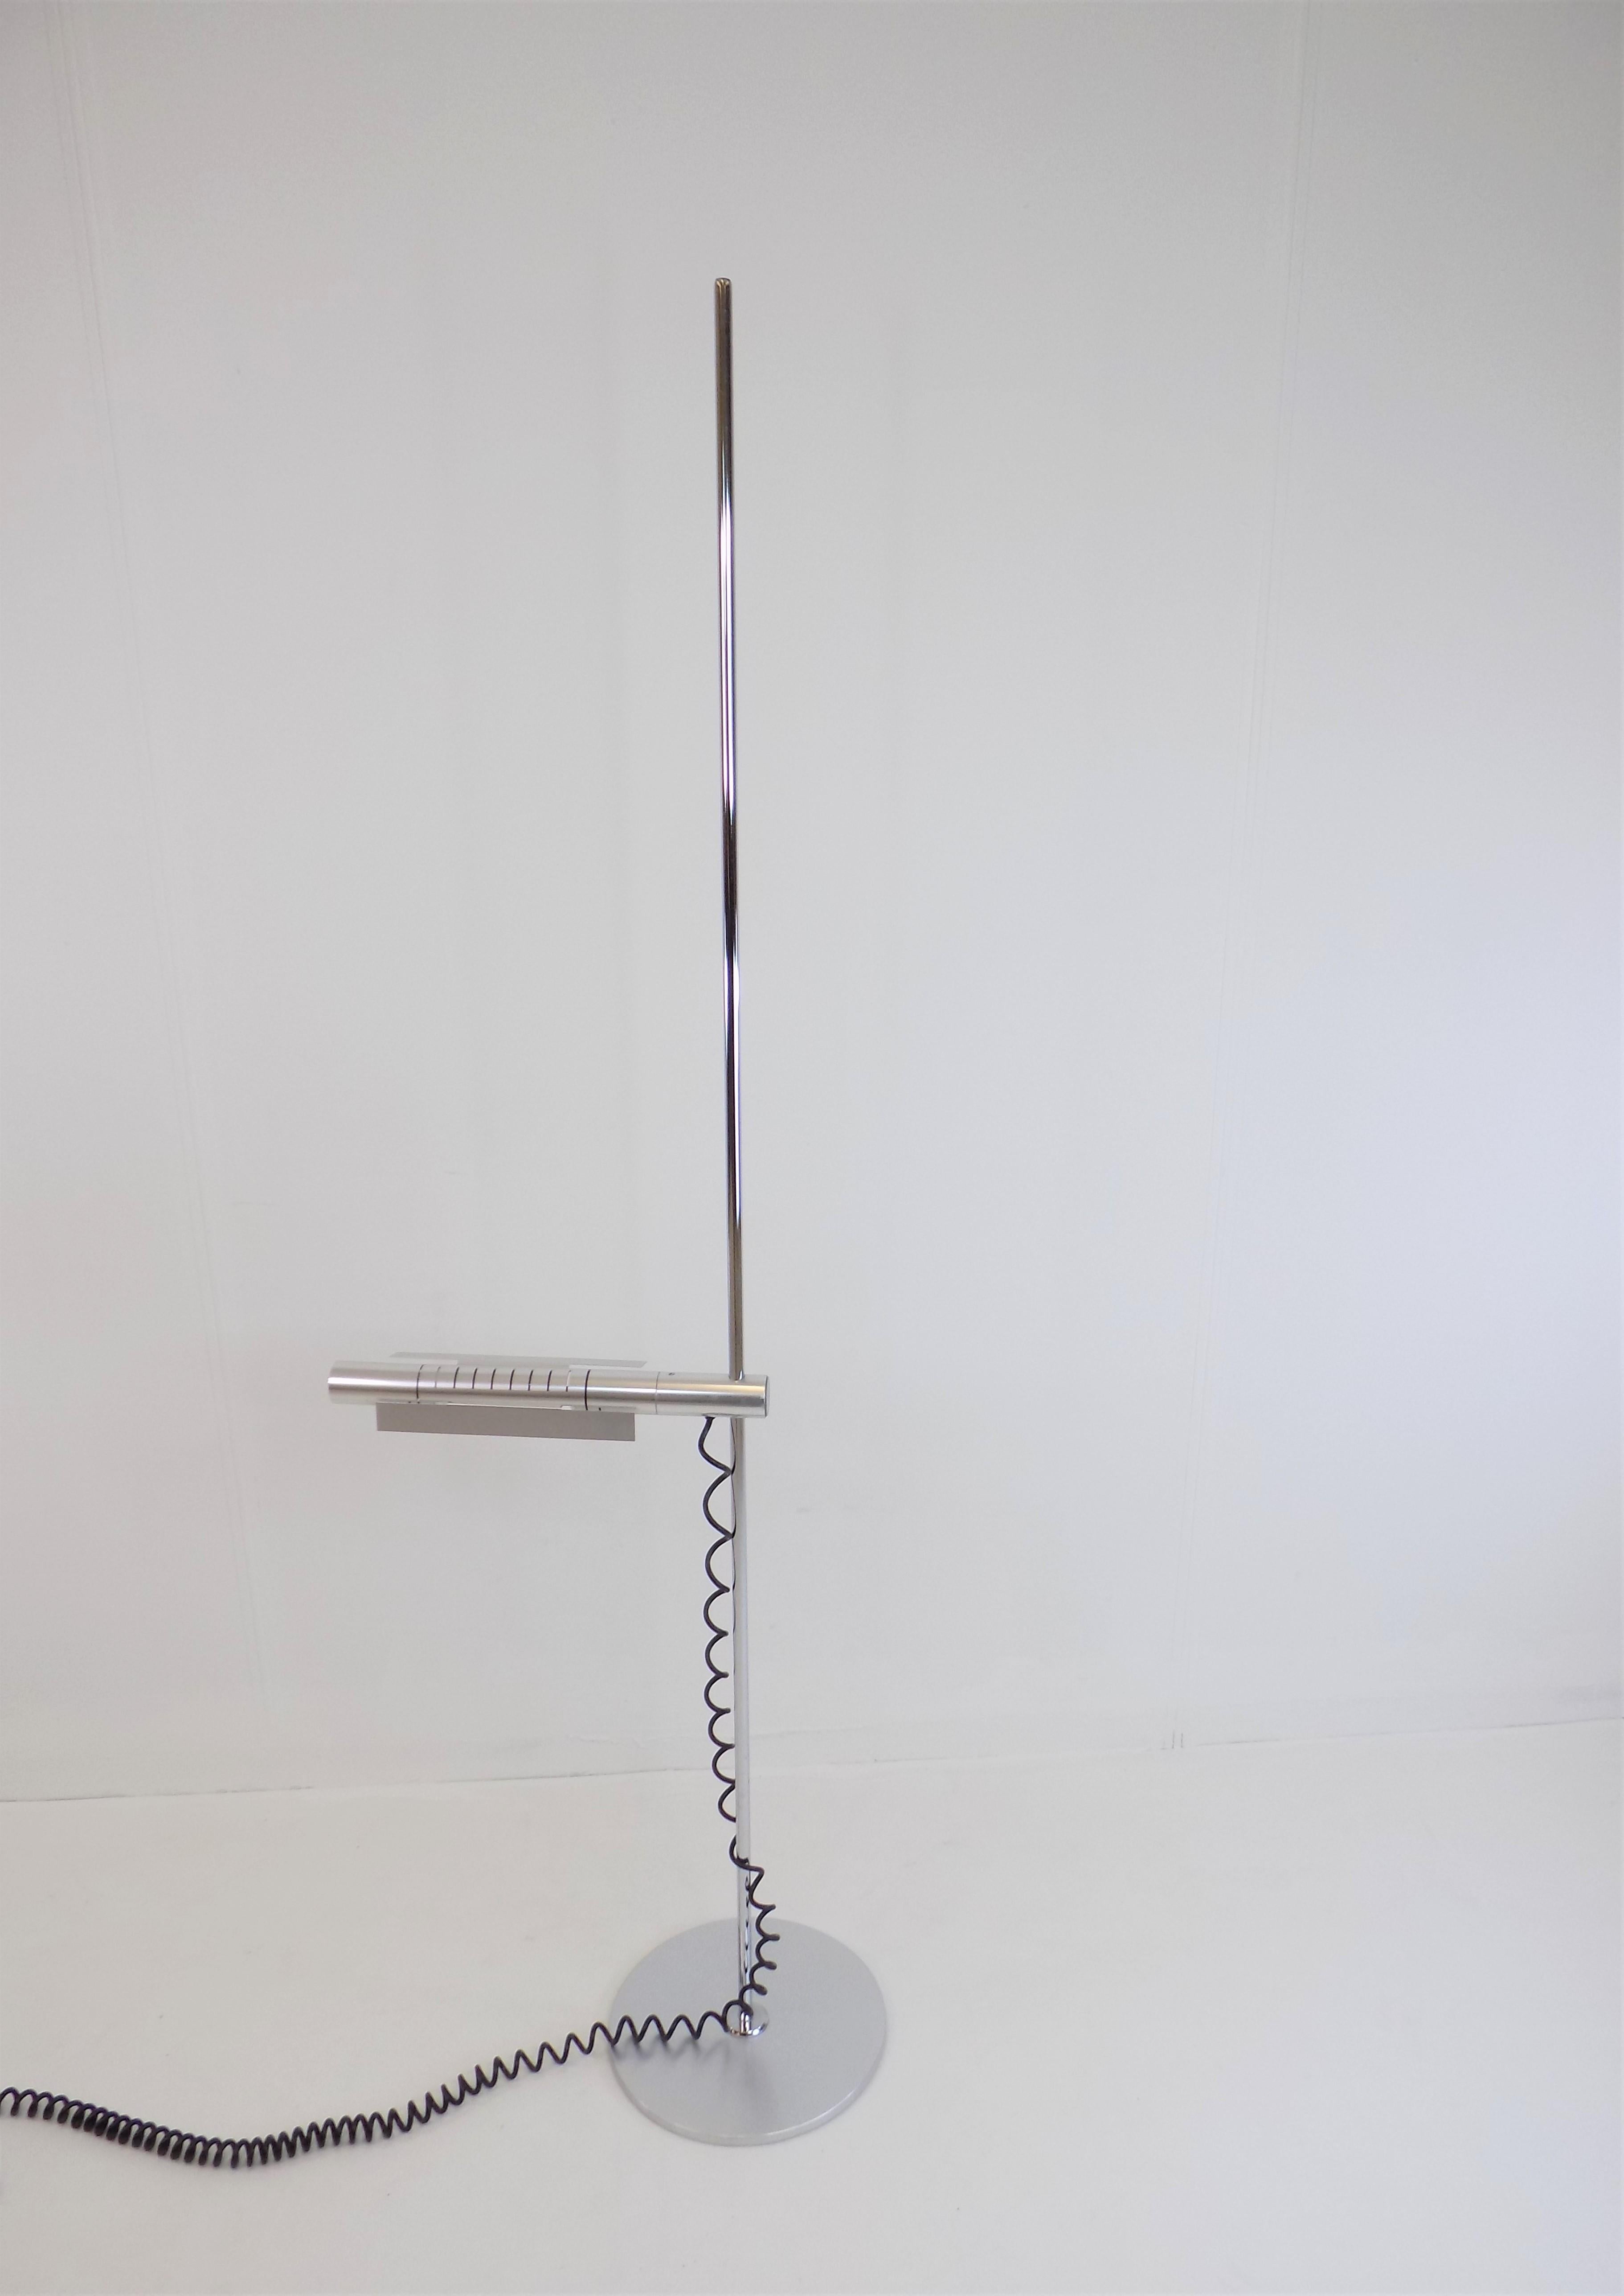 Late 20th Century Swisslamps International Halo 250 Floor Lamp by R. and R. Baltensweiler For Sale